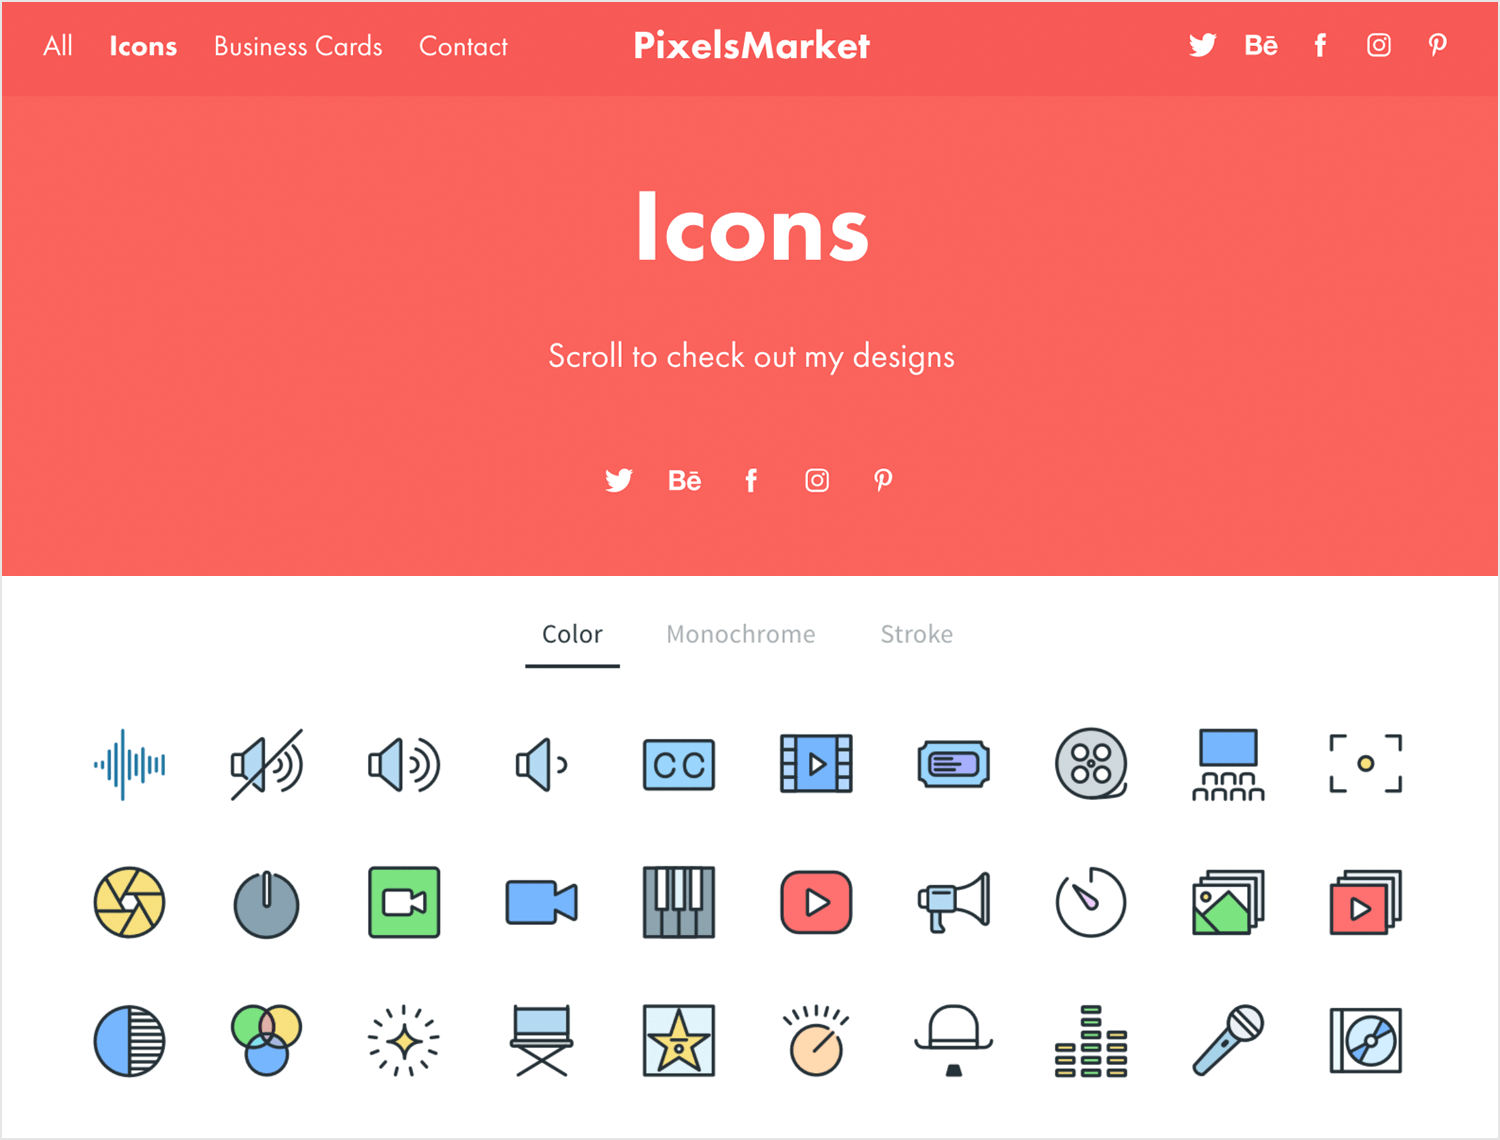 pixels market as place for free icons